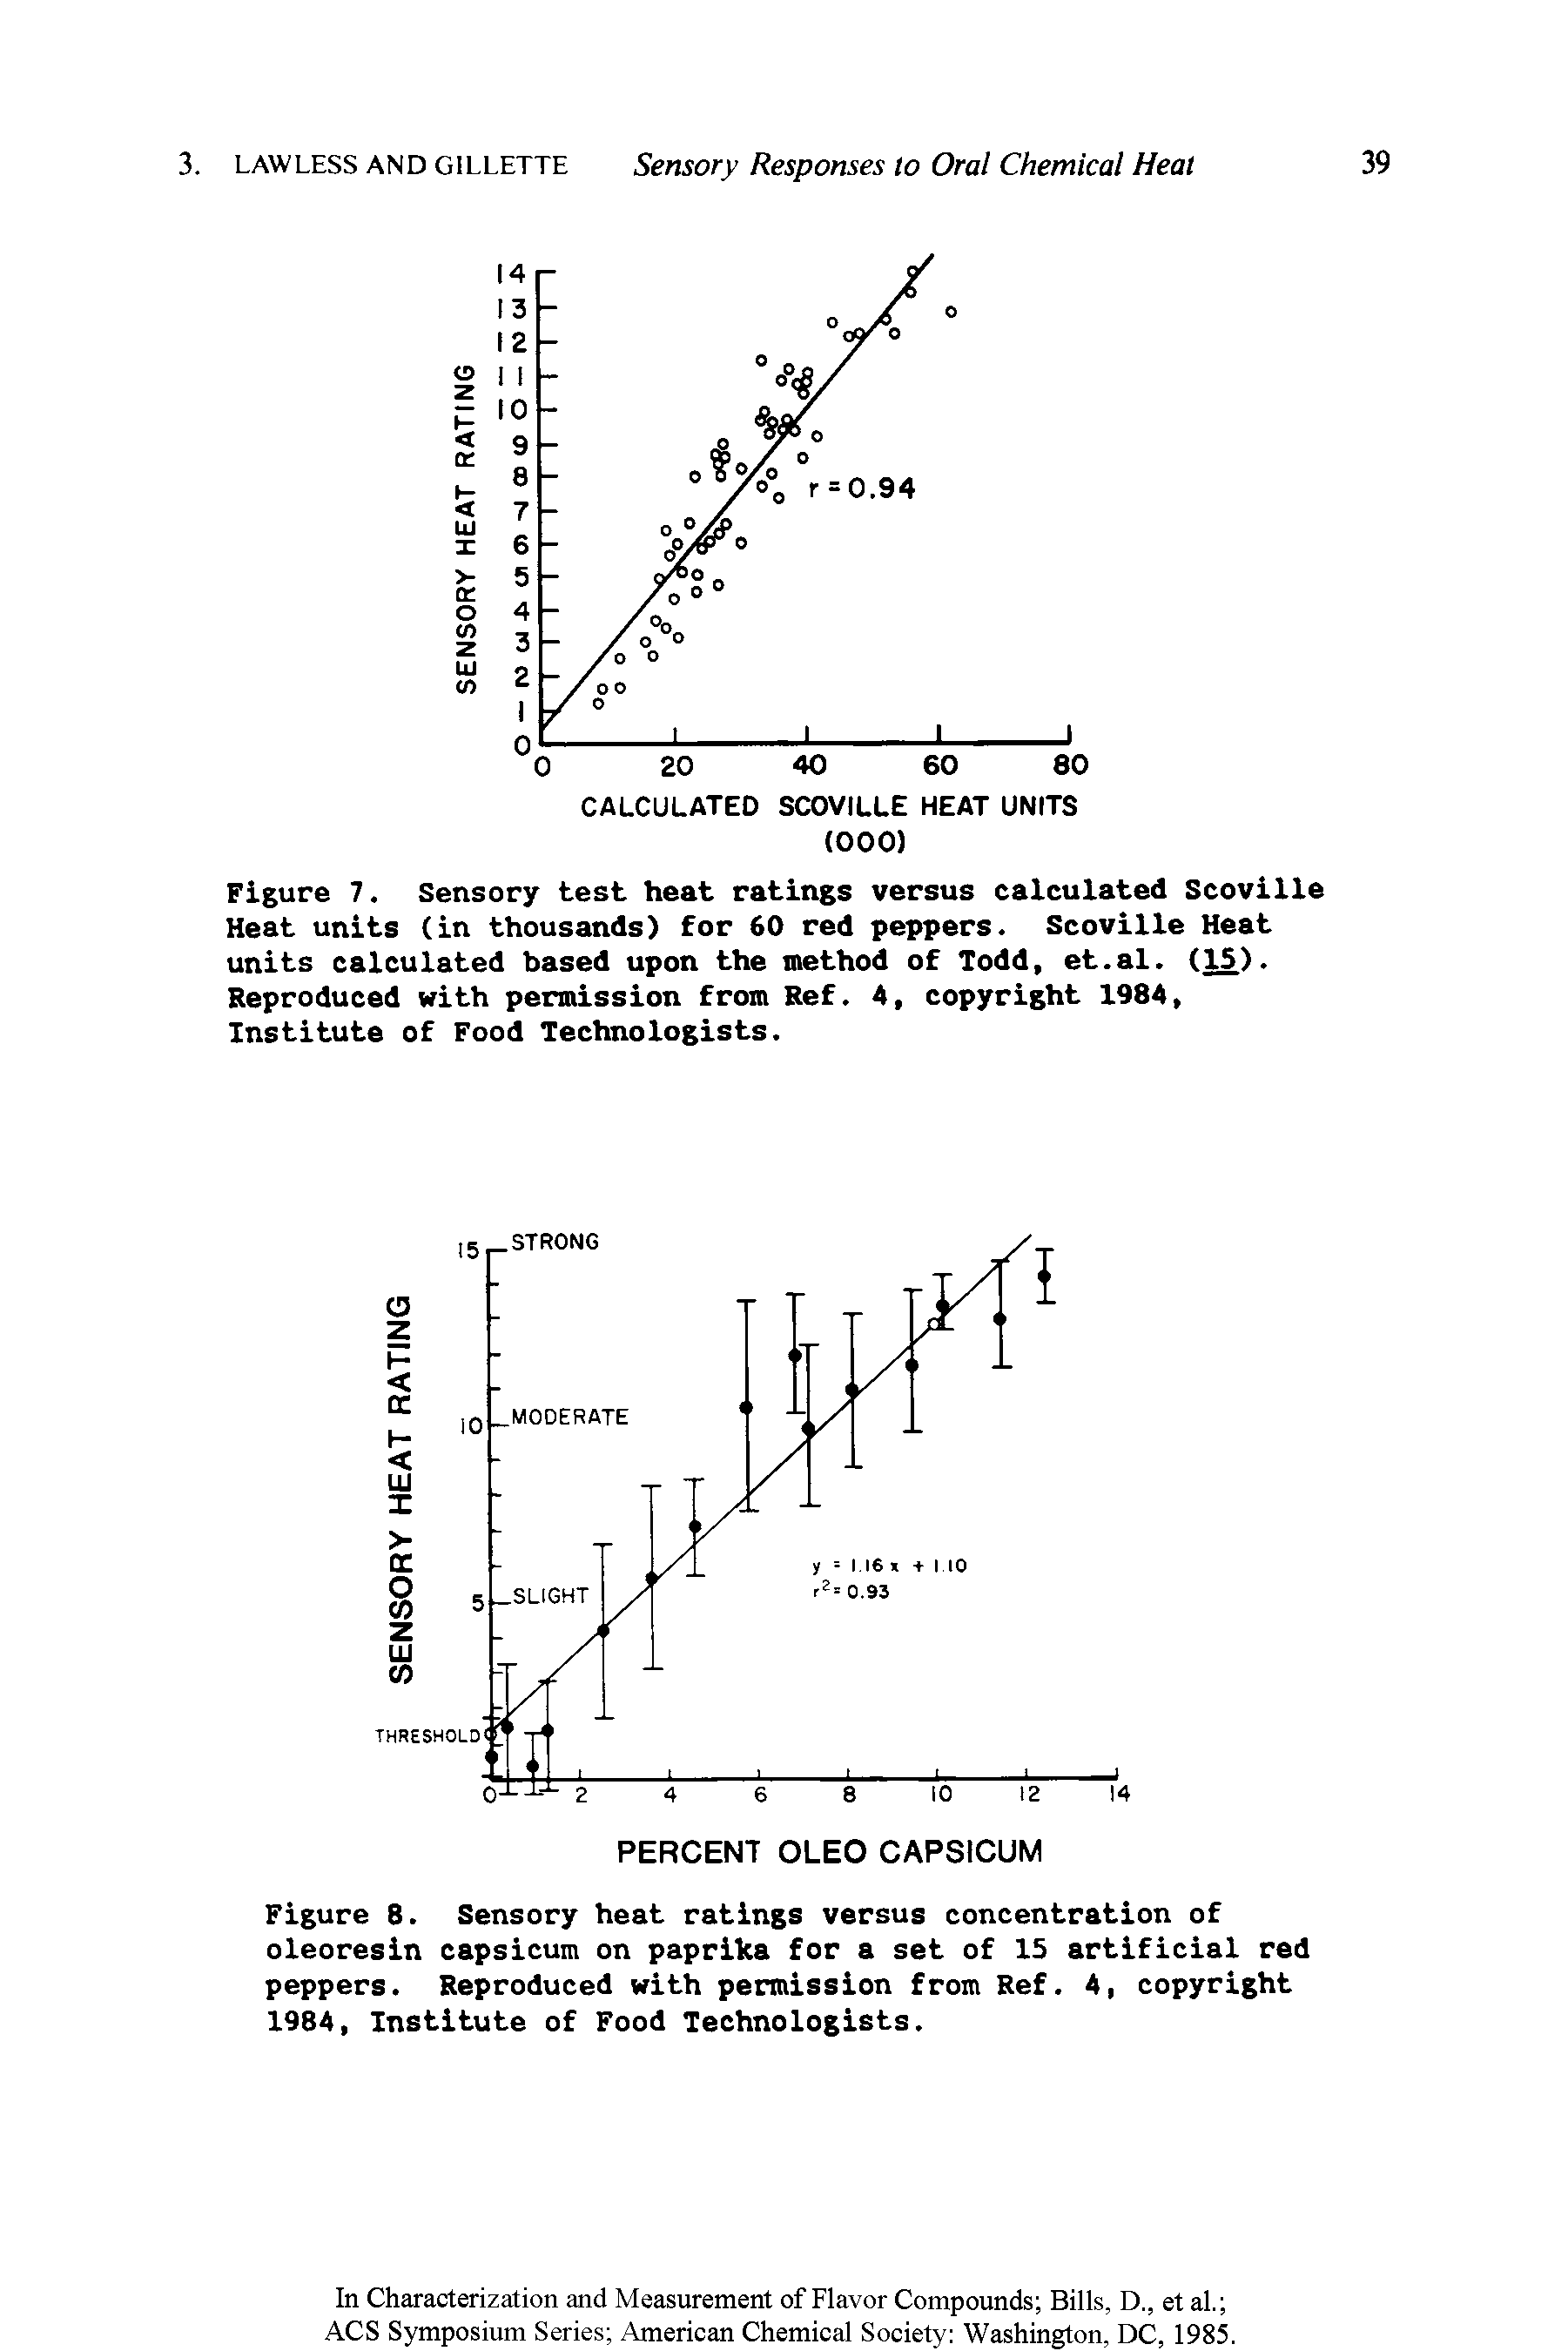 Figure 8. Sensory heat ratings versus concentration of oleoresin capsicum on paprika for a set of 15 artificial red peppers. Reproduced with permission from Ref. 4, copyright 1984, Institute of Food Technologists.